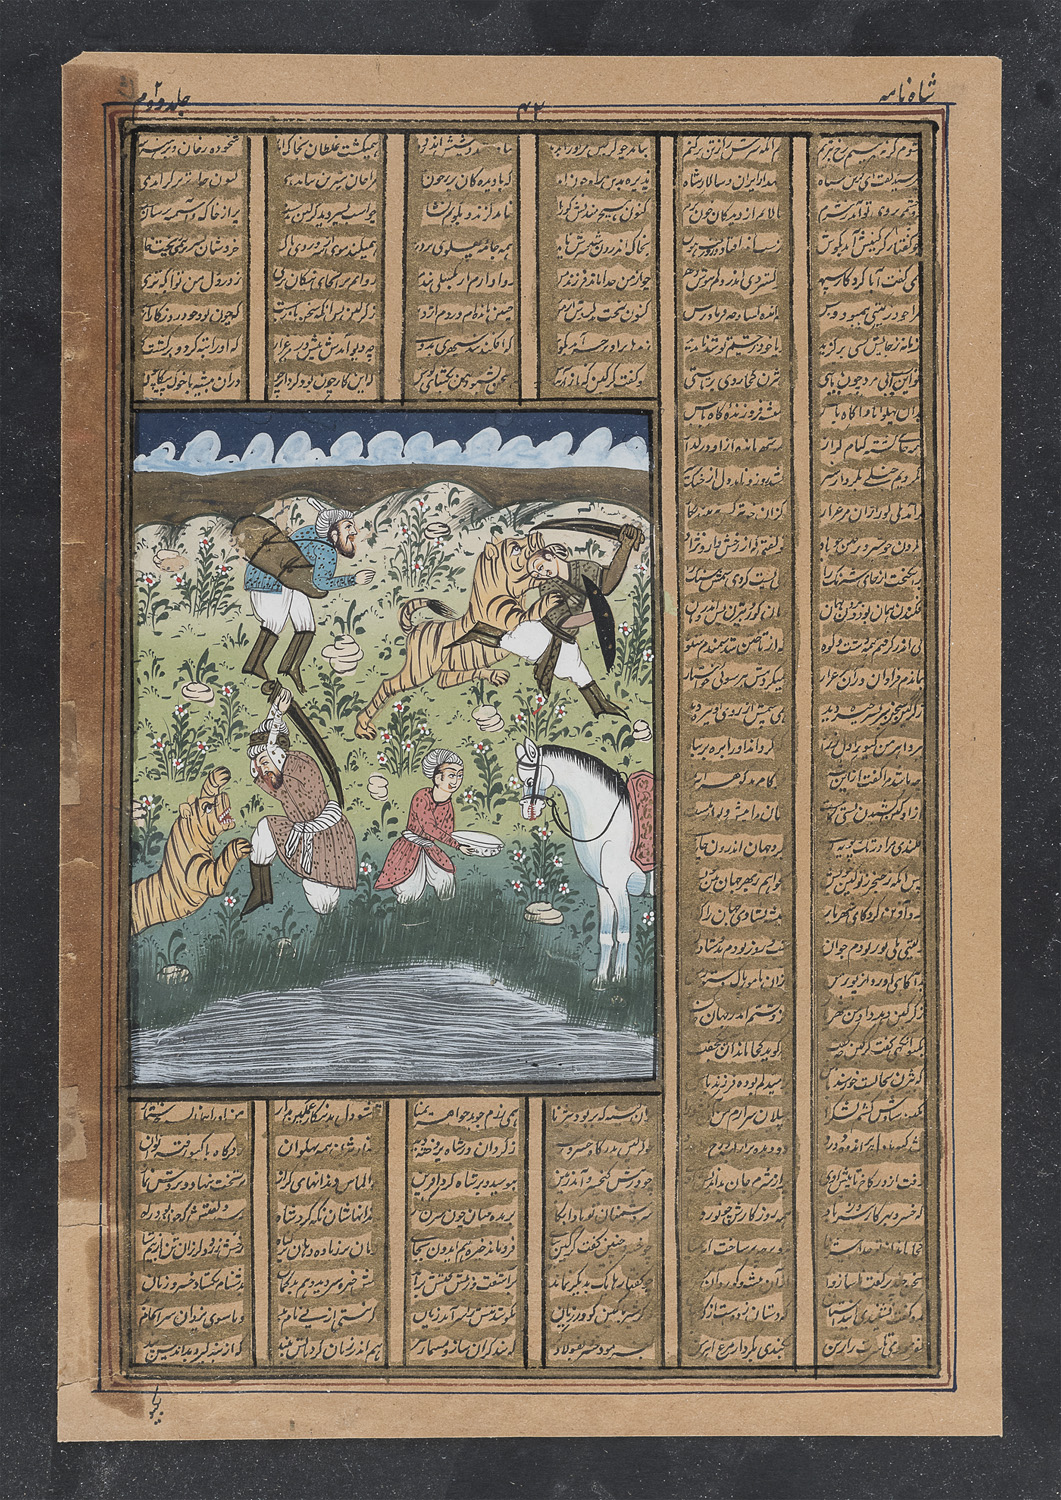 PERSIAN SCHOOL END 19TH EARLY 20TH CENTURY. FIGHT WITH TIGERS AND HISTORICAL NARRATIVE. MIXED MEDIA